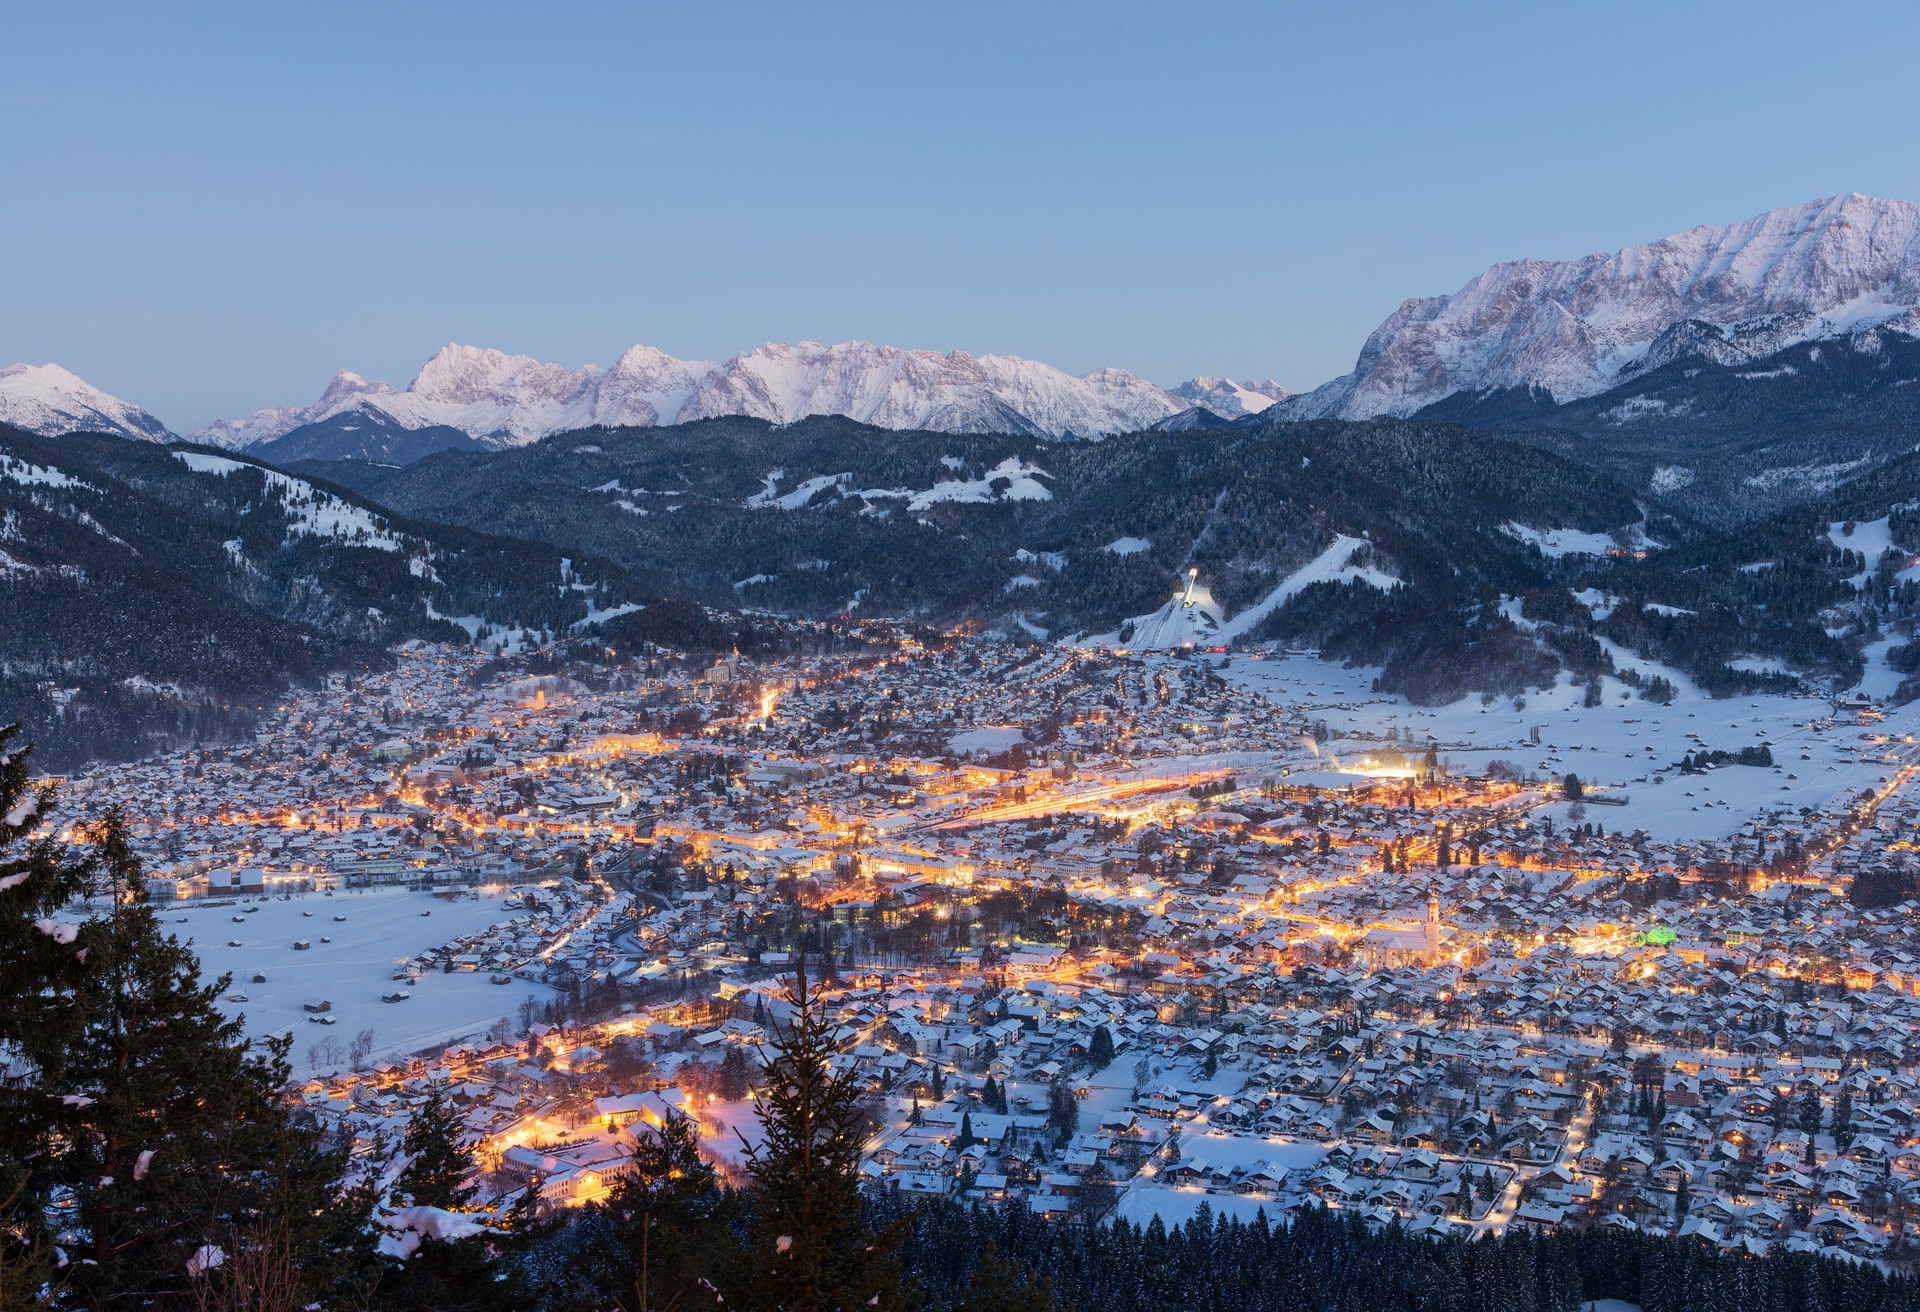 Garmisch-Partenkirchen with snow and mountains in the background at sunset, Bavaria, Germany; Shutterstock ID 561748624